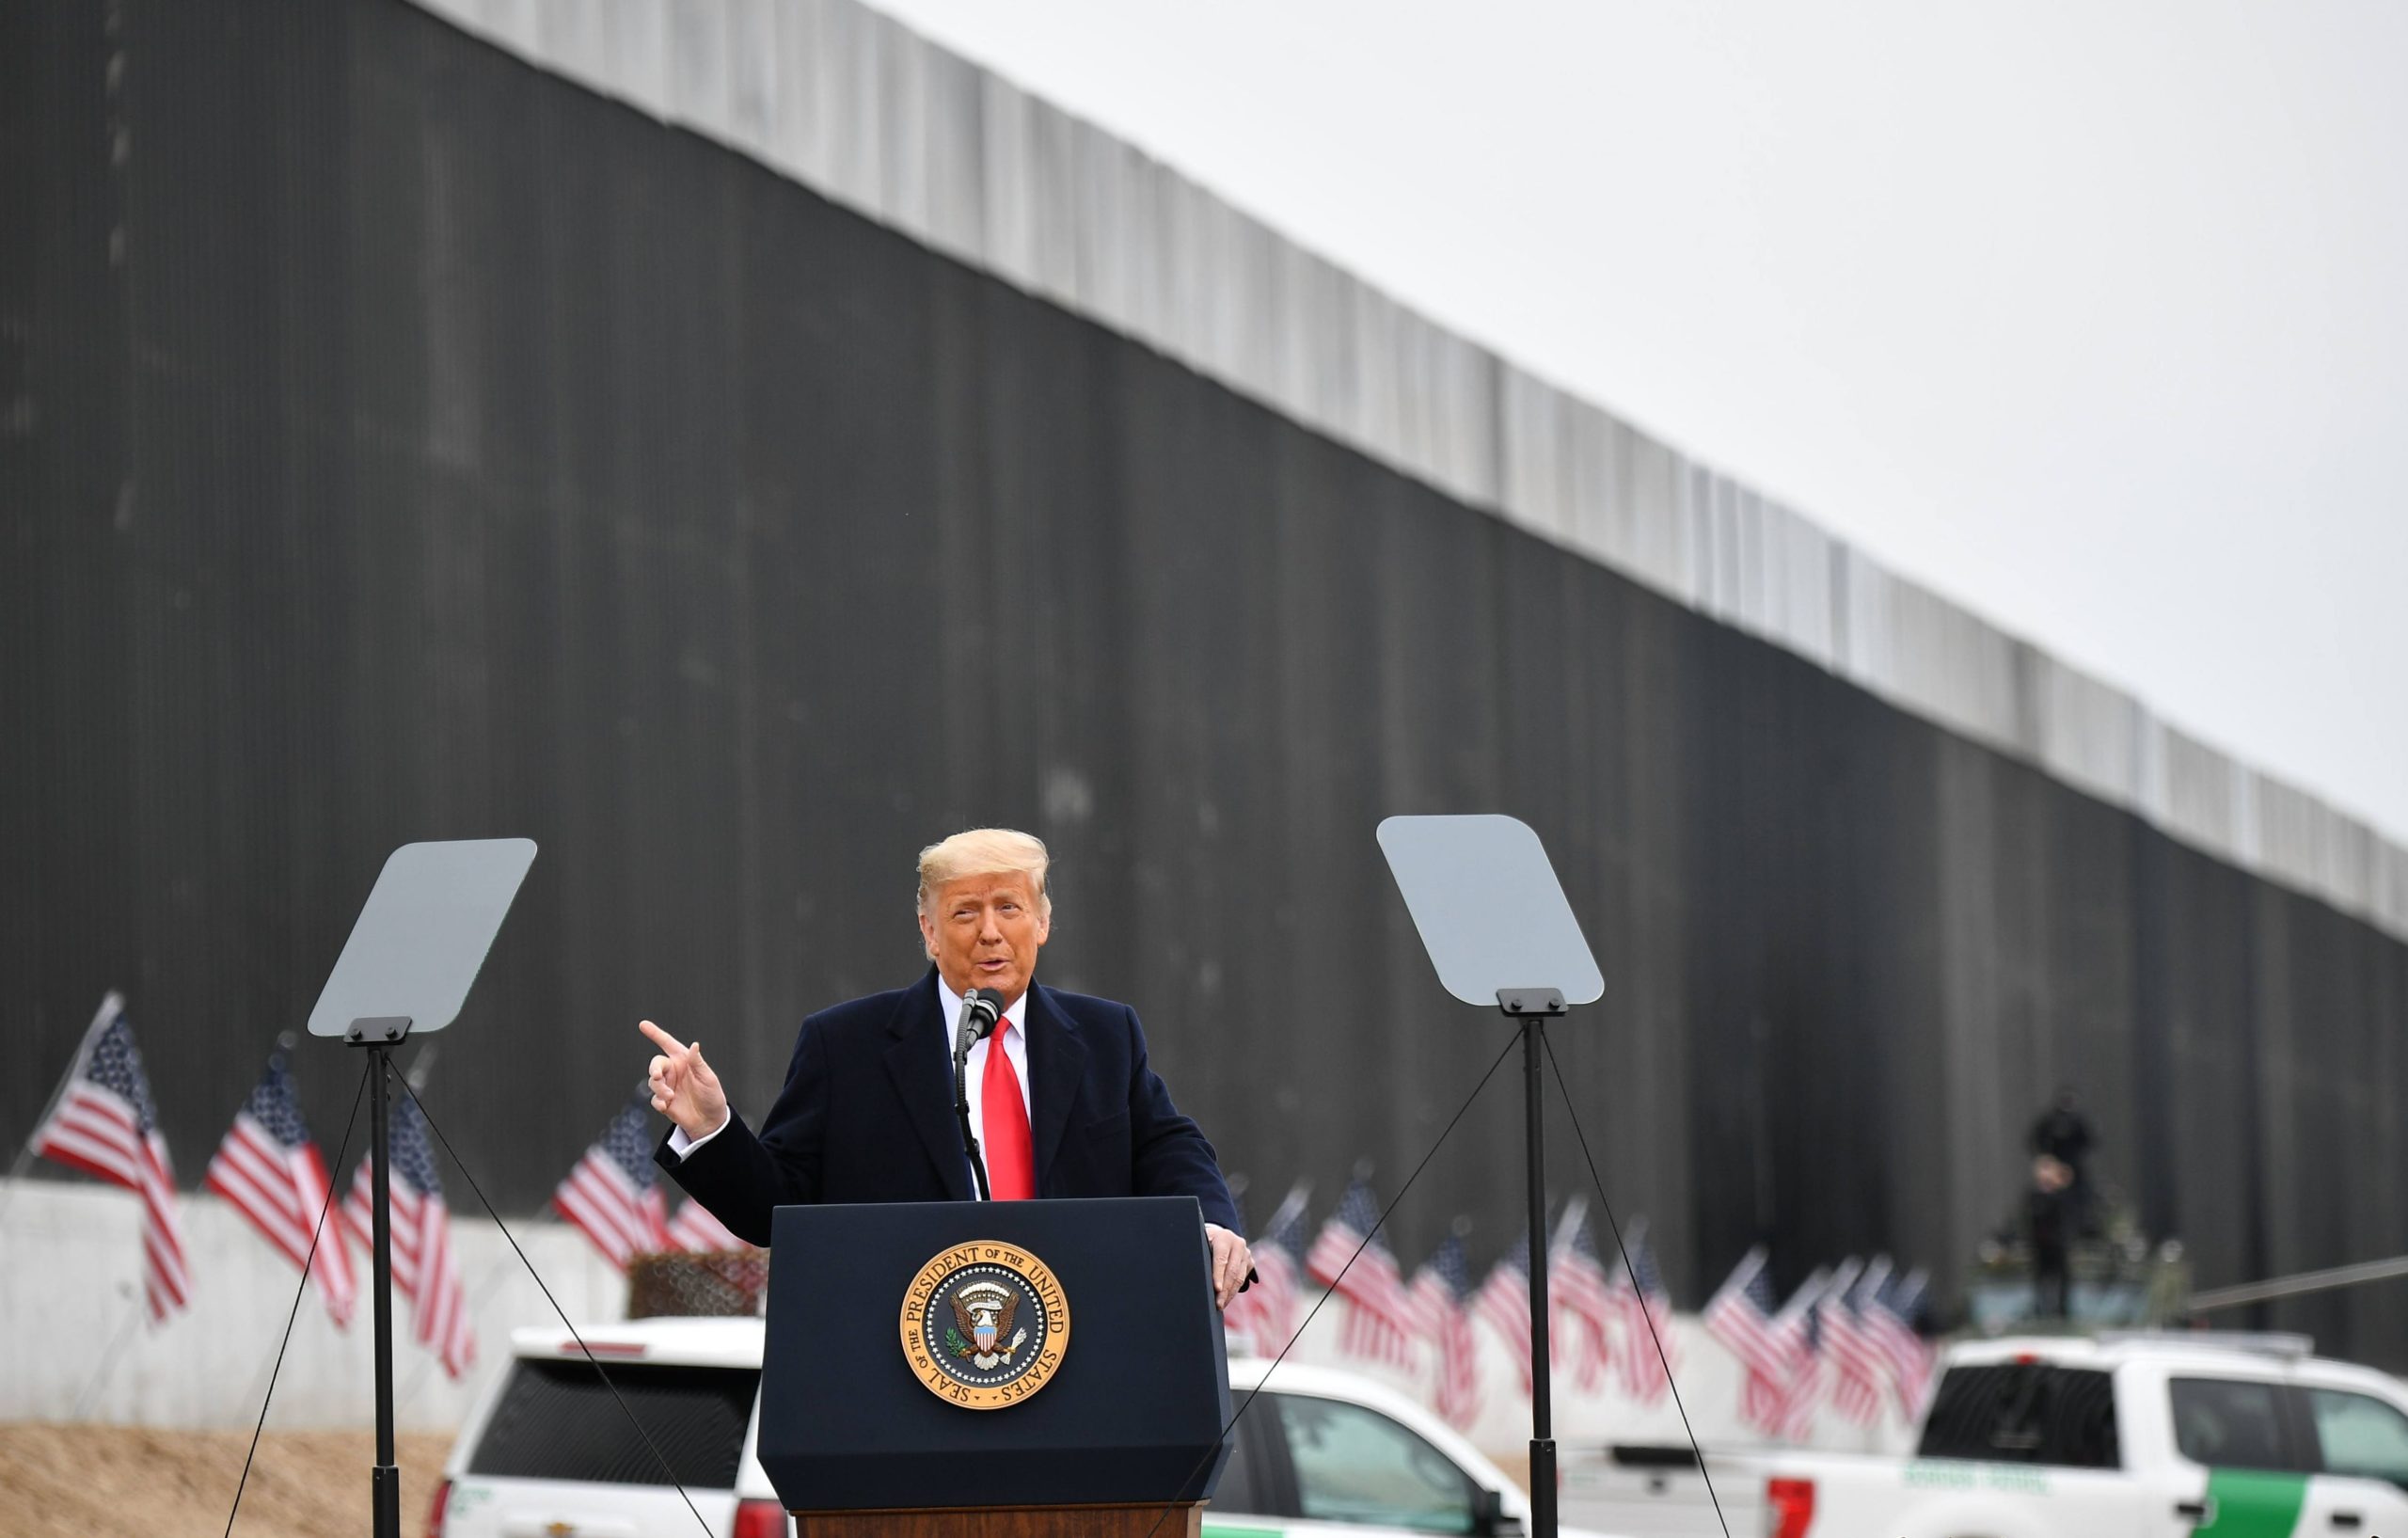 US President Donald Trump speaks after touring a section of the border wall in Alamo, Texas on January 12, 2021. (Photo by MANDEL NGAN/AFP via Getty Images)